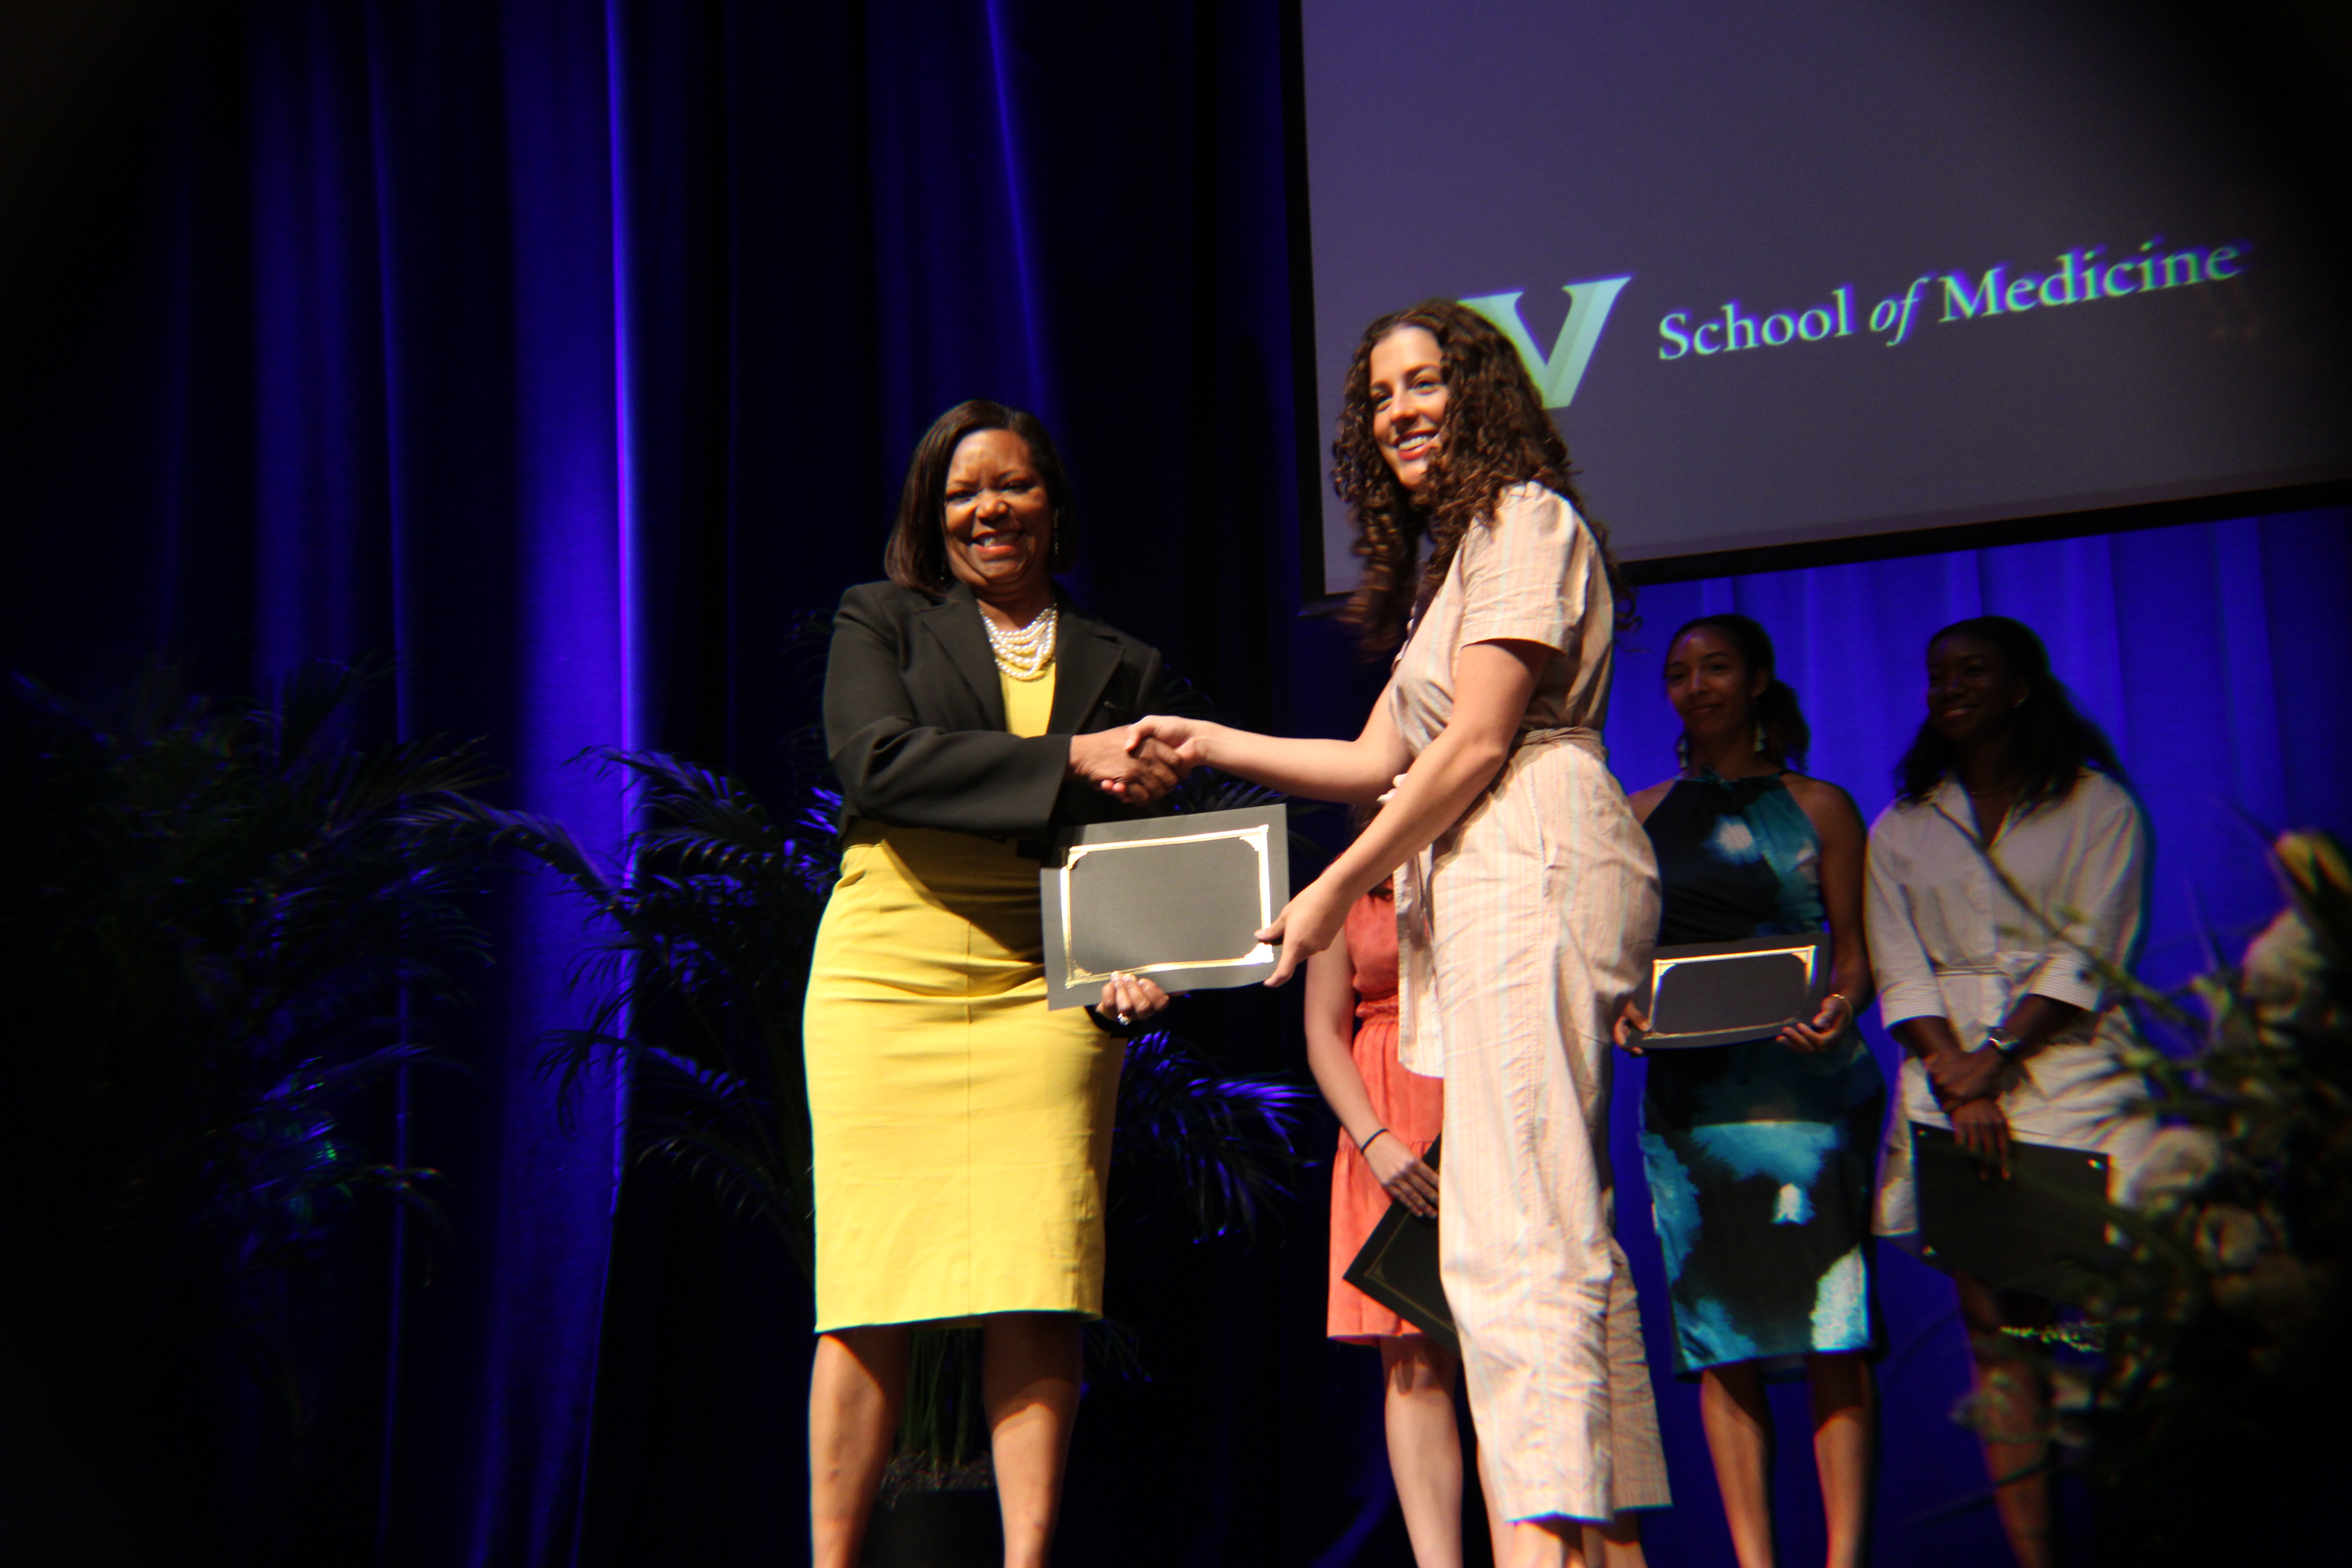 A dean in a yellow dress presents an award to an MD student